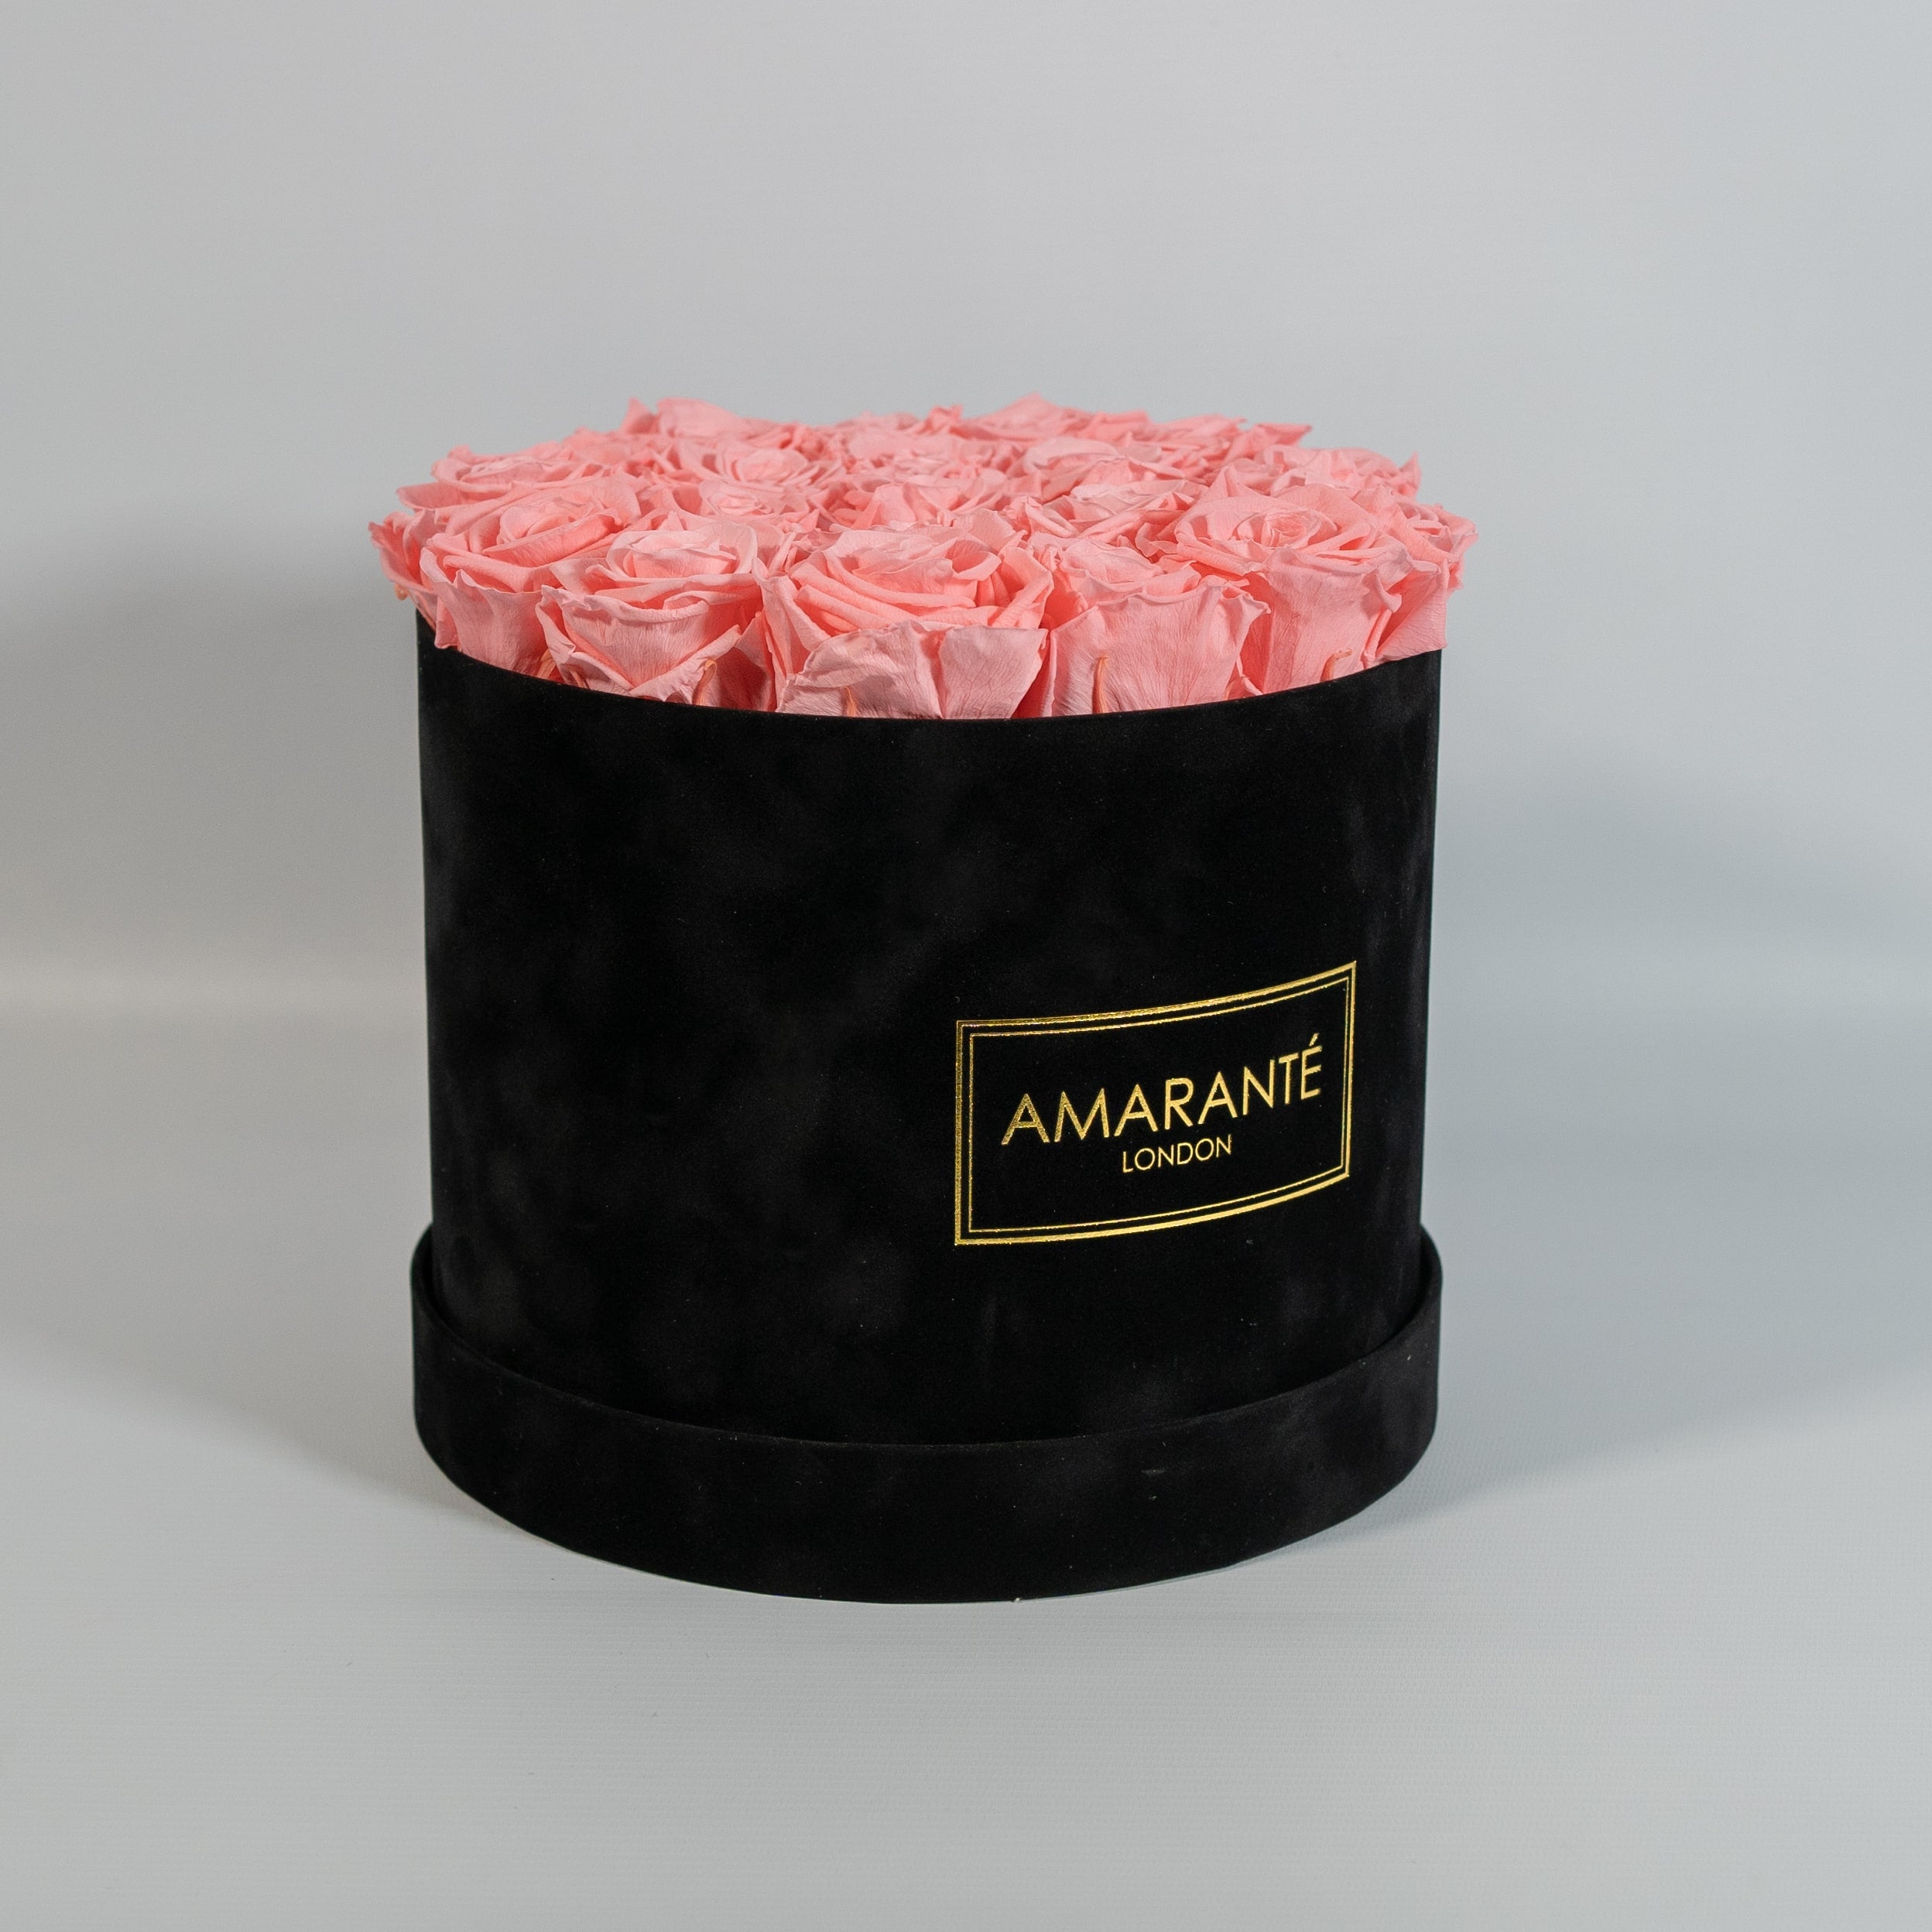 Tender light pink Roses imbedded in a bold black box 